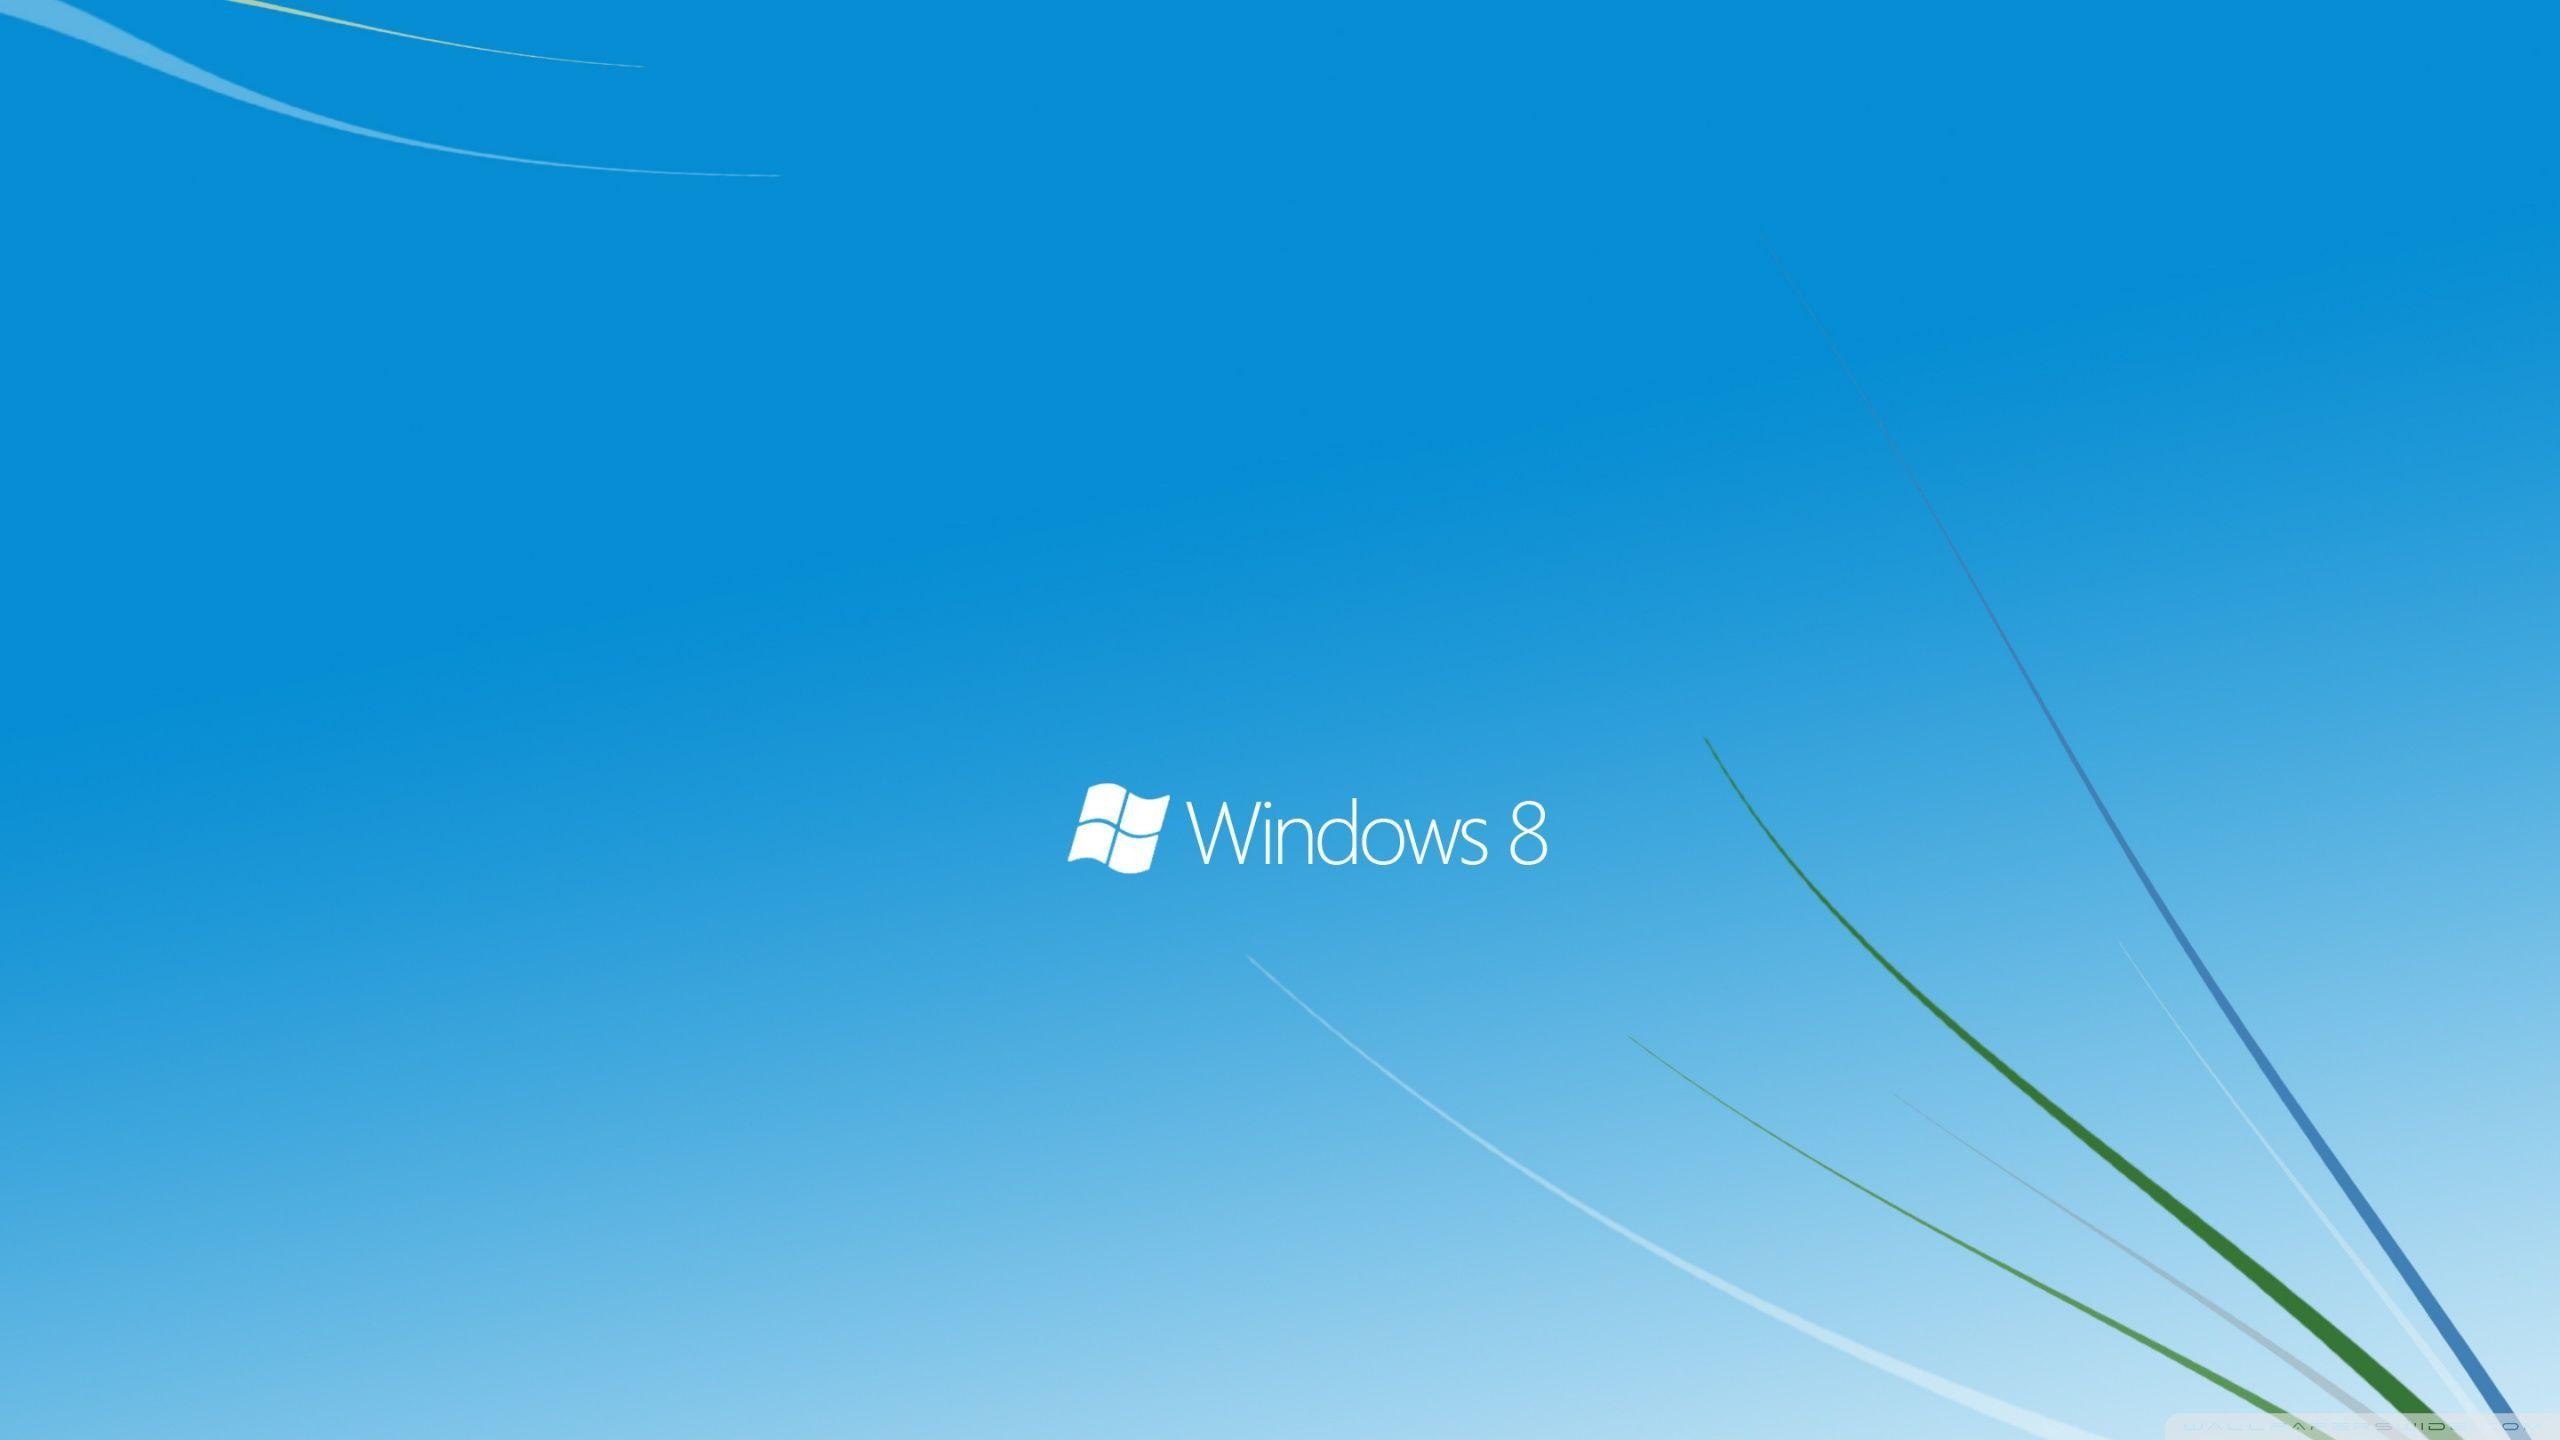 Windows 8 grass theme wallpaper and image, picture